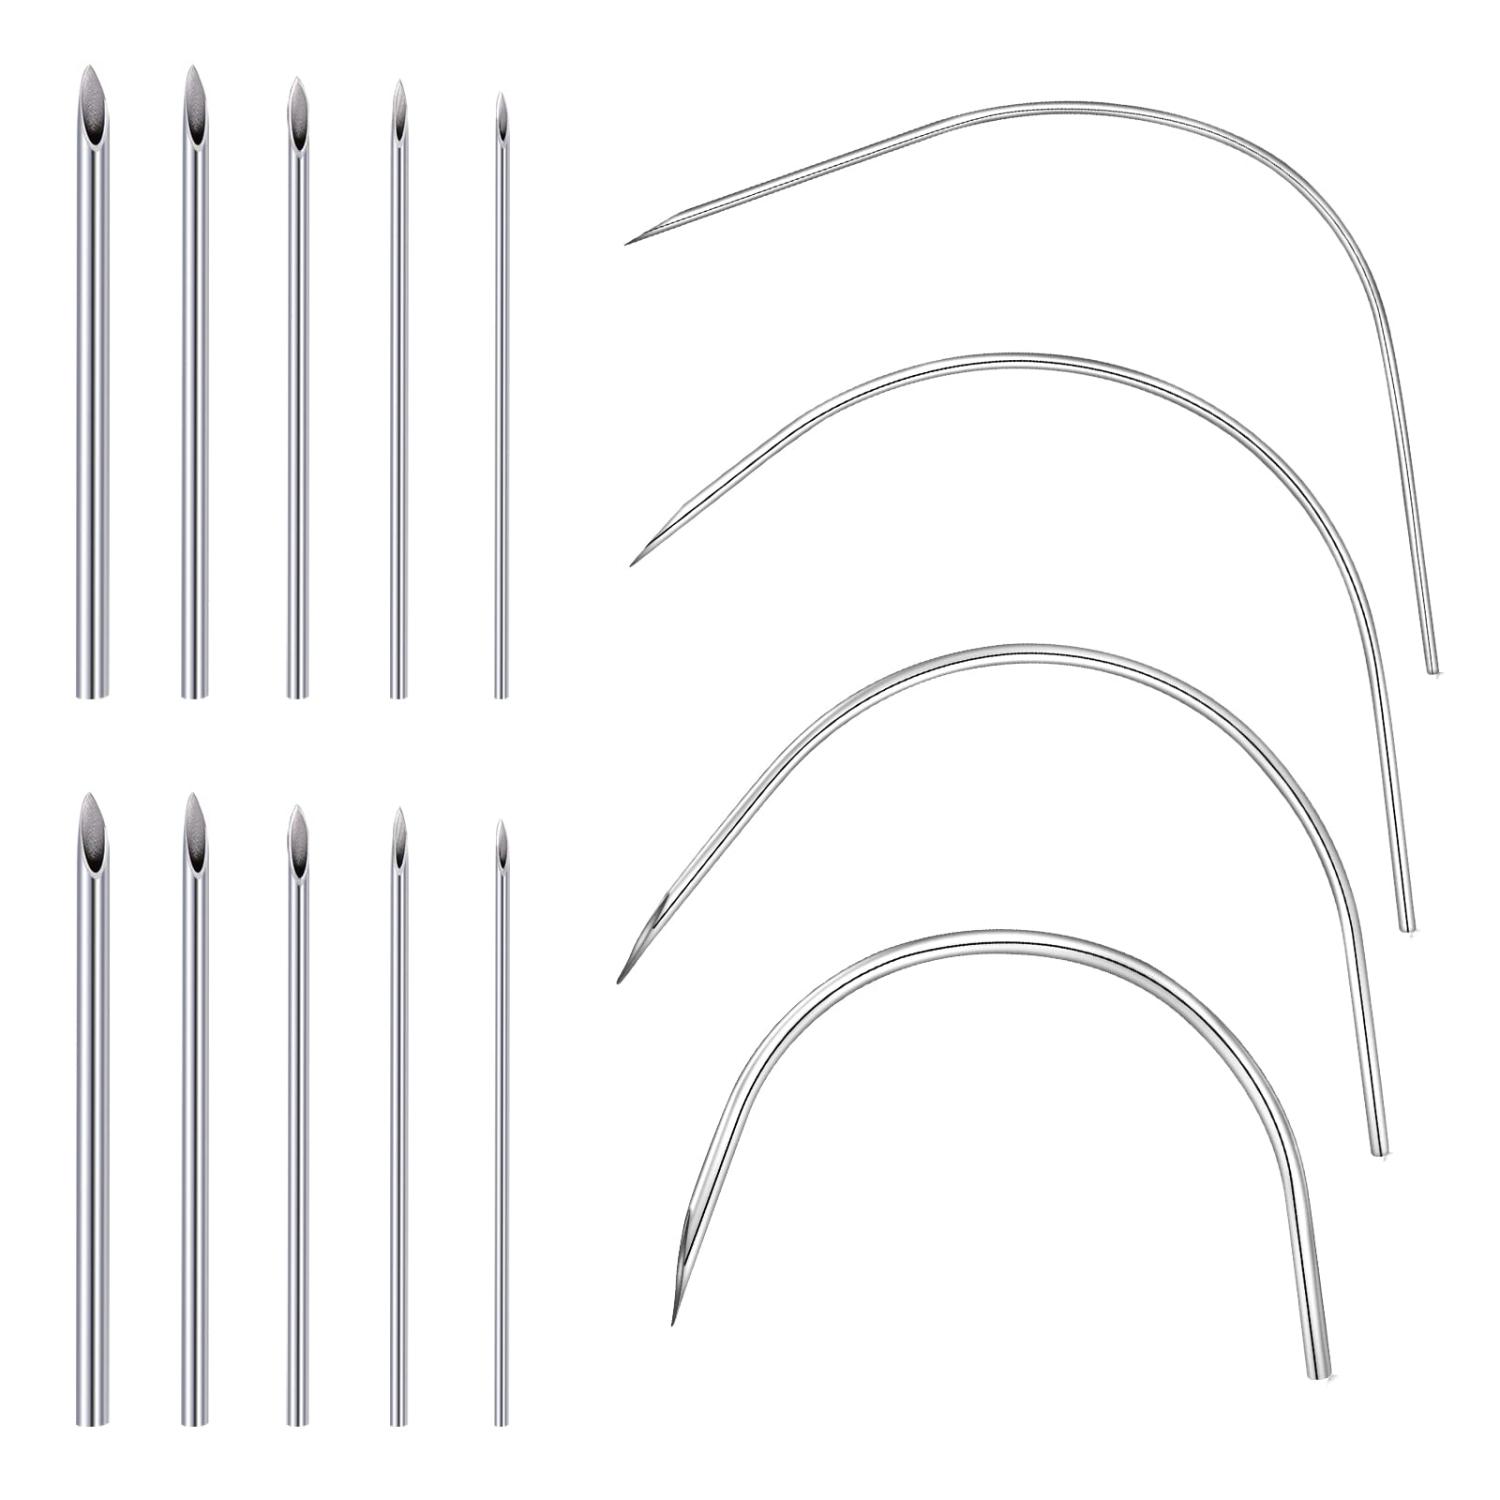 Useful curved sterile piercing needle available in different gauge